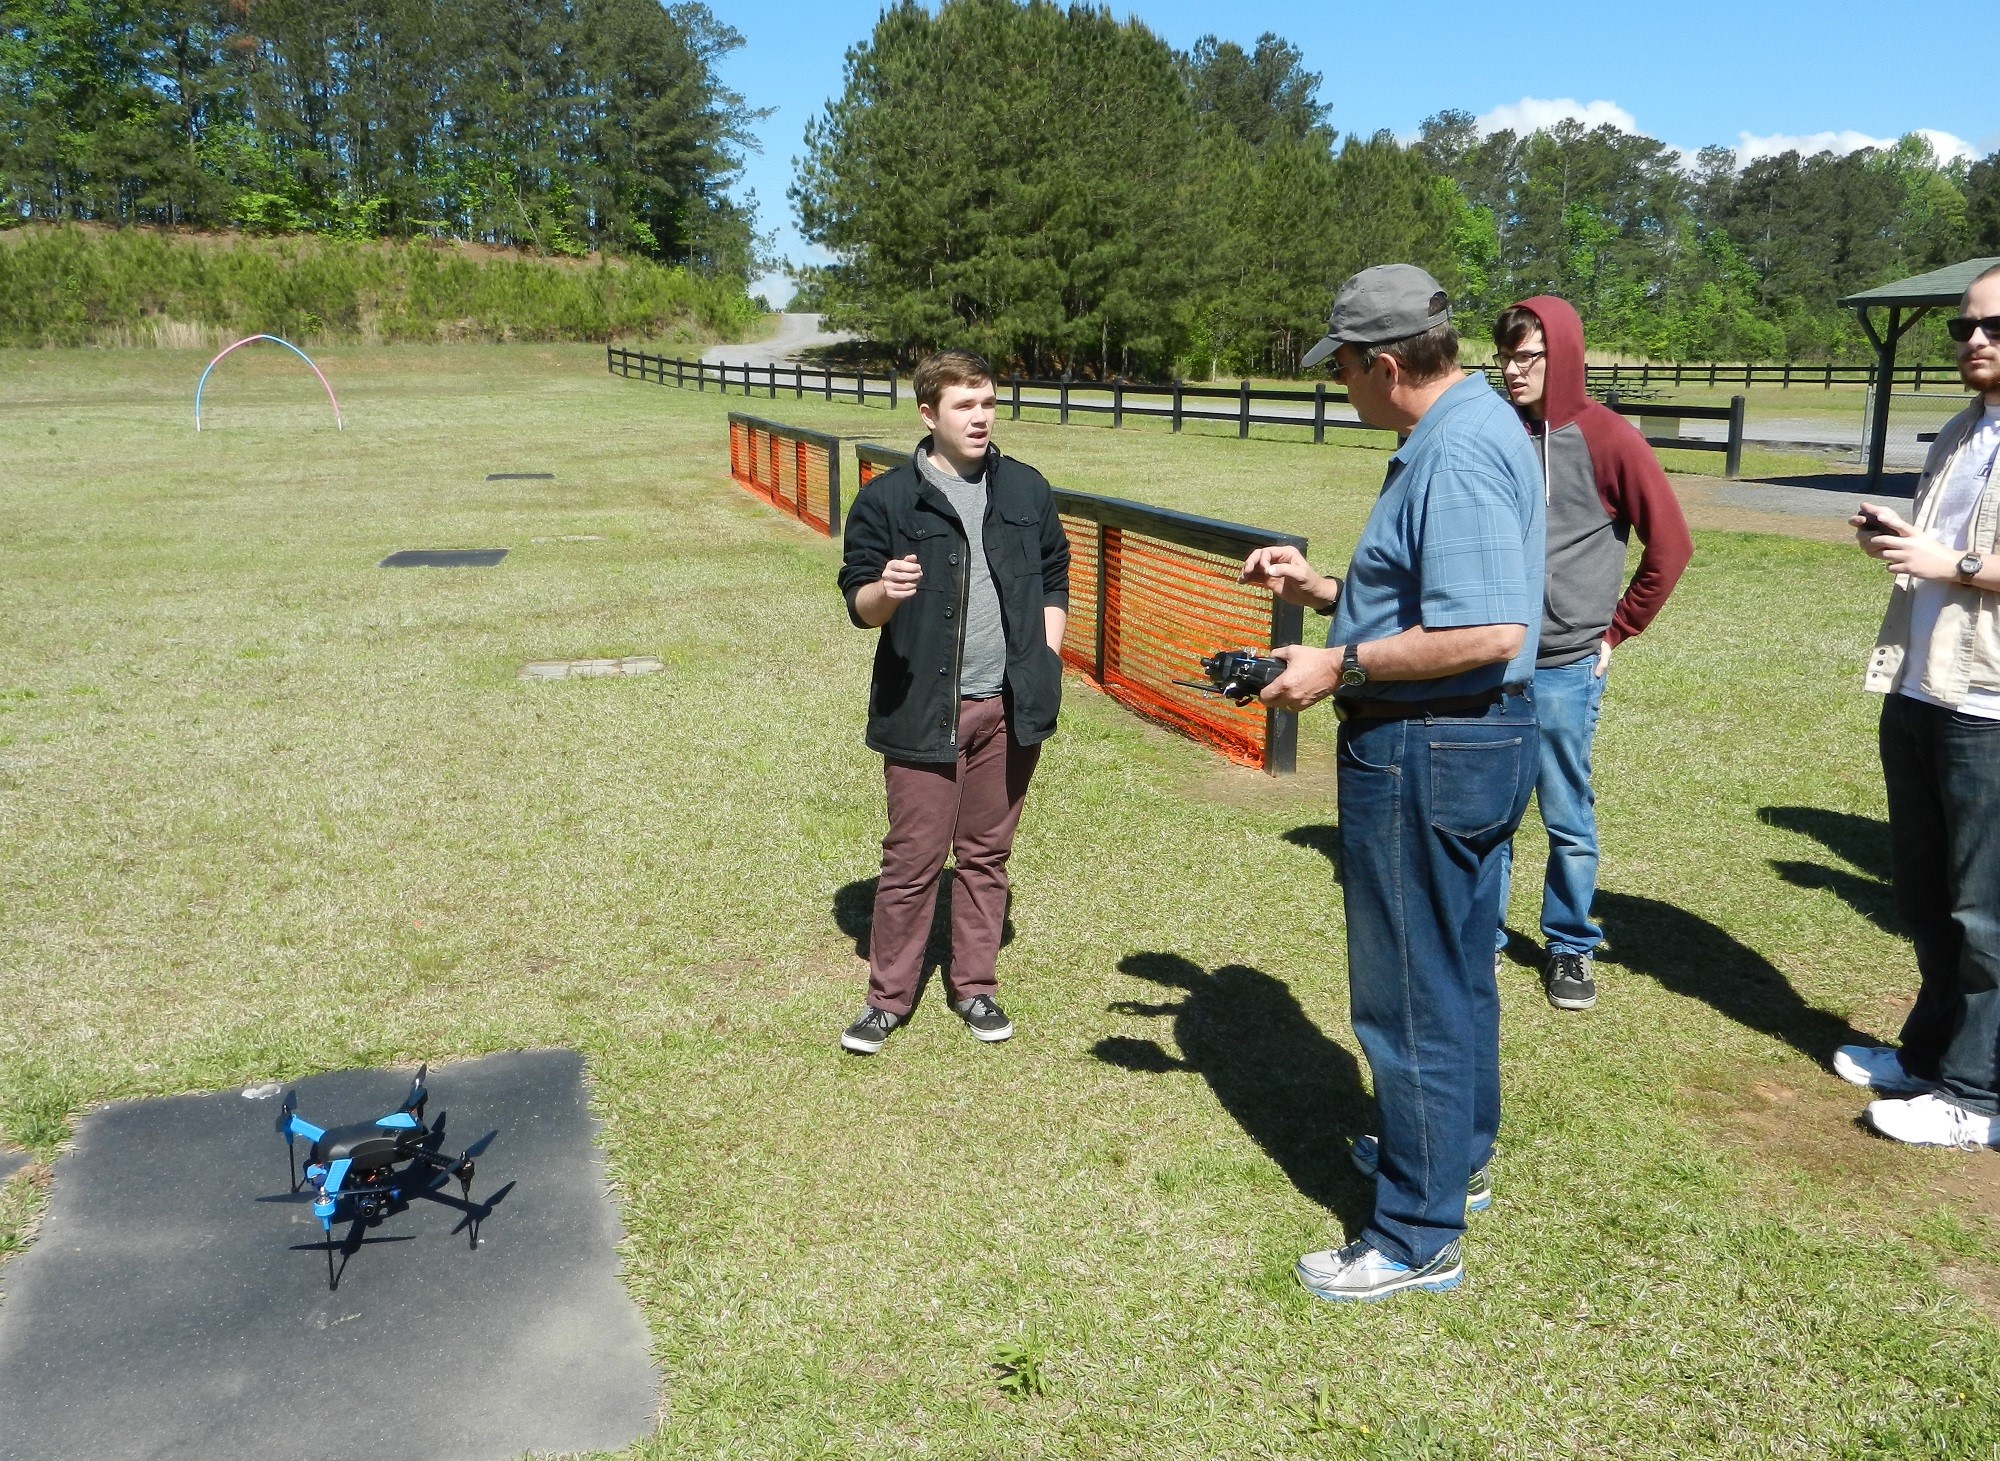 People discussing near a quadcopter